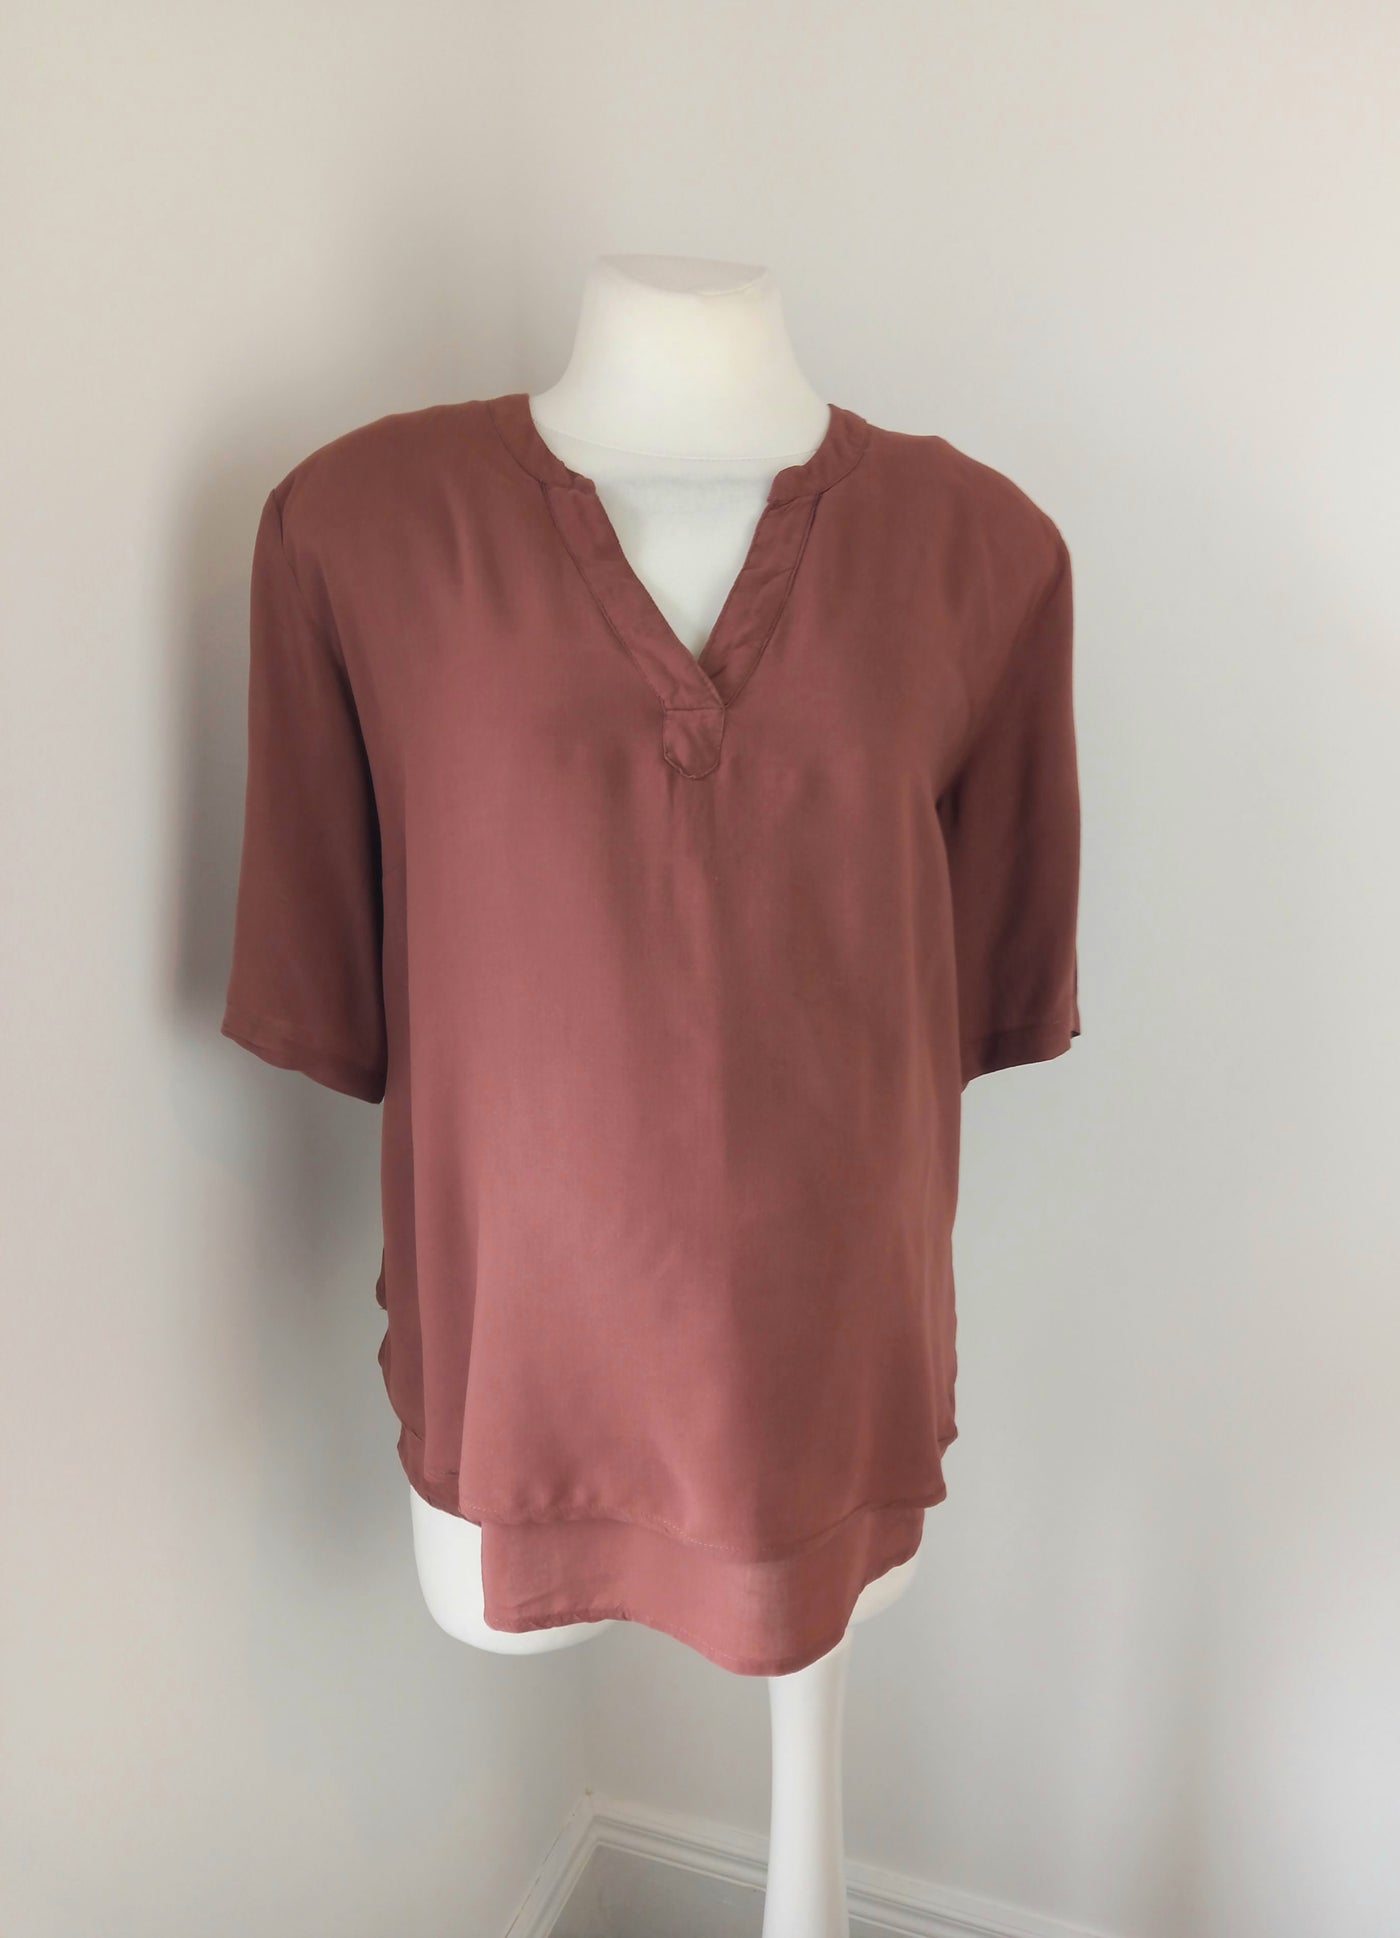 H&M Mama brown v-neck layered nursing top - Size L (Approx UK 12/14)